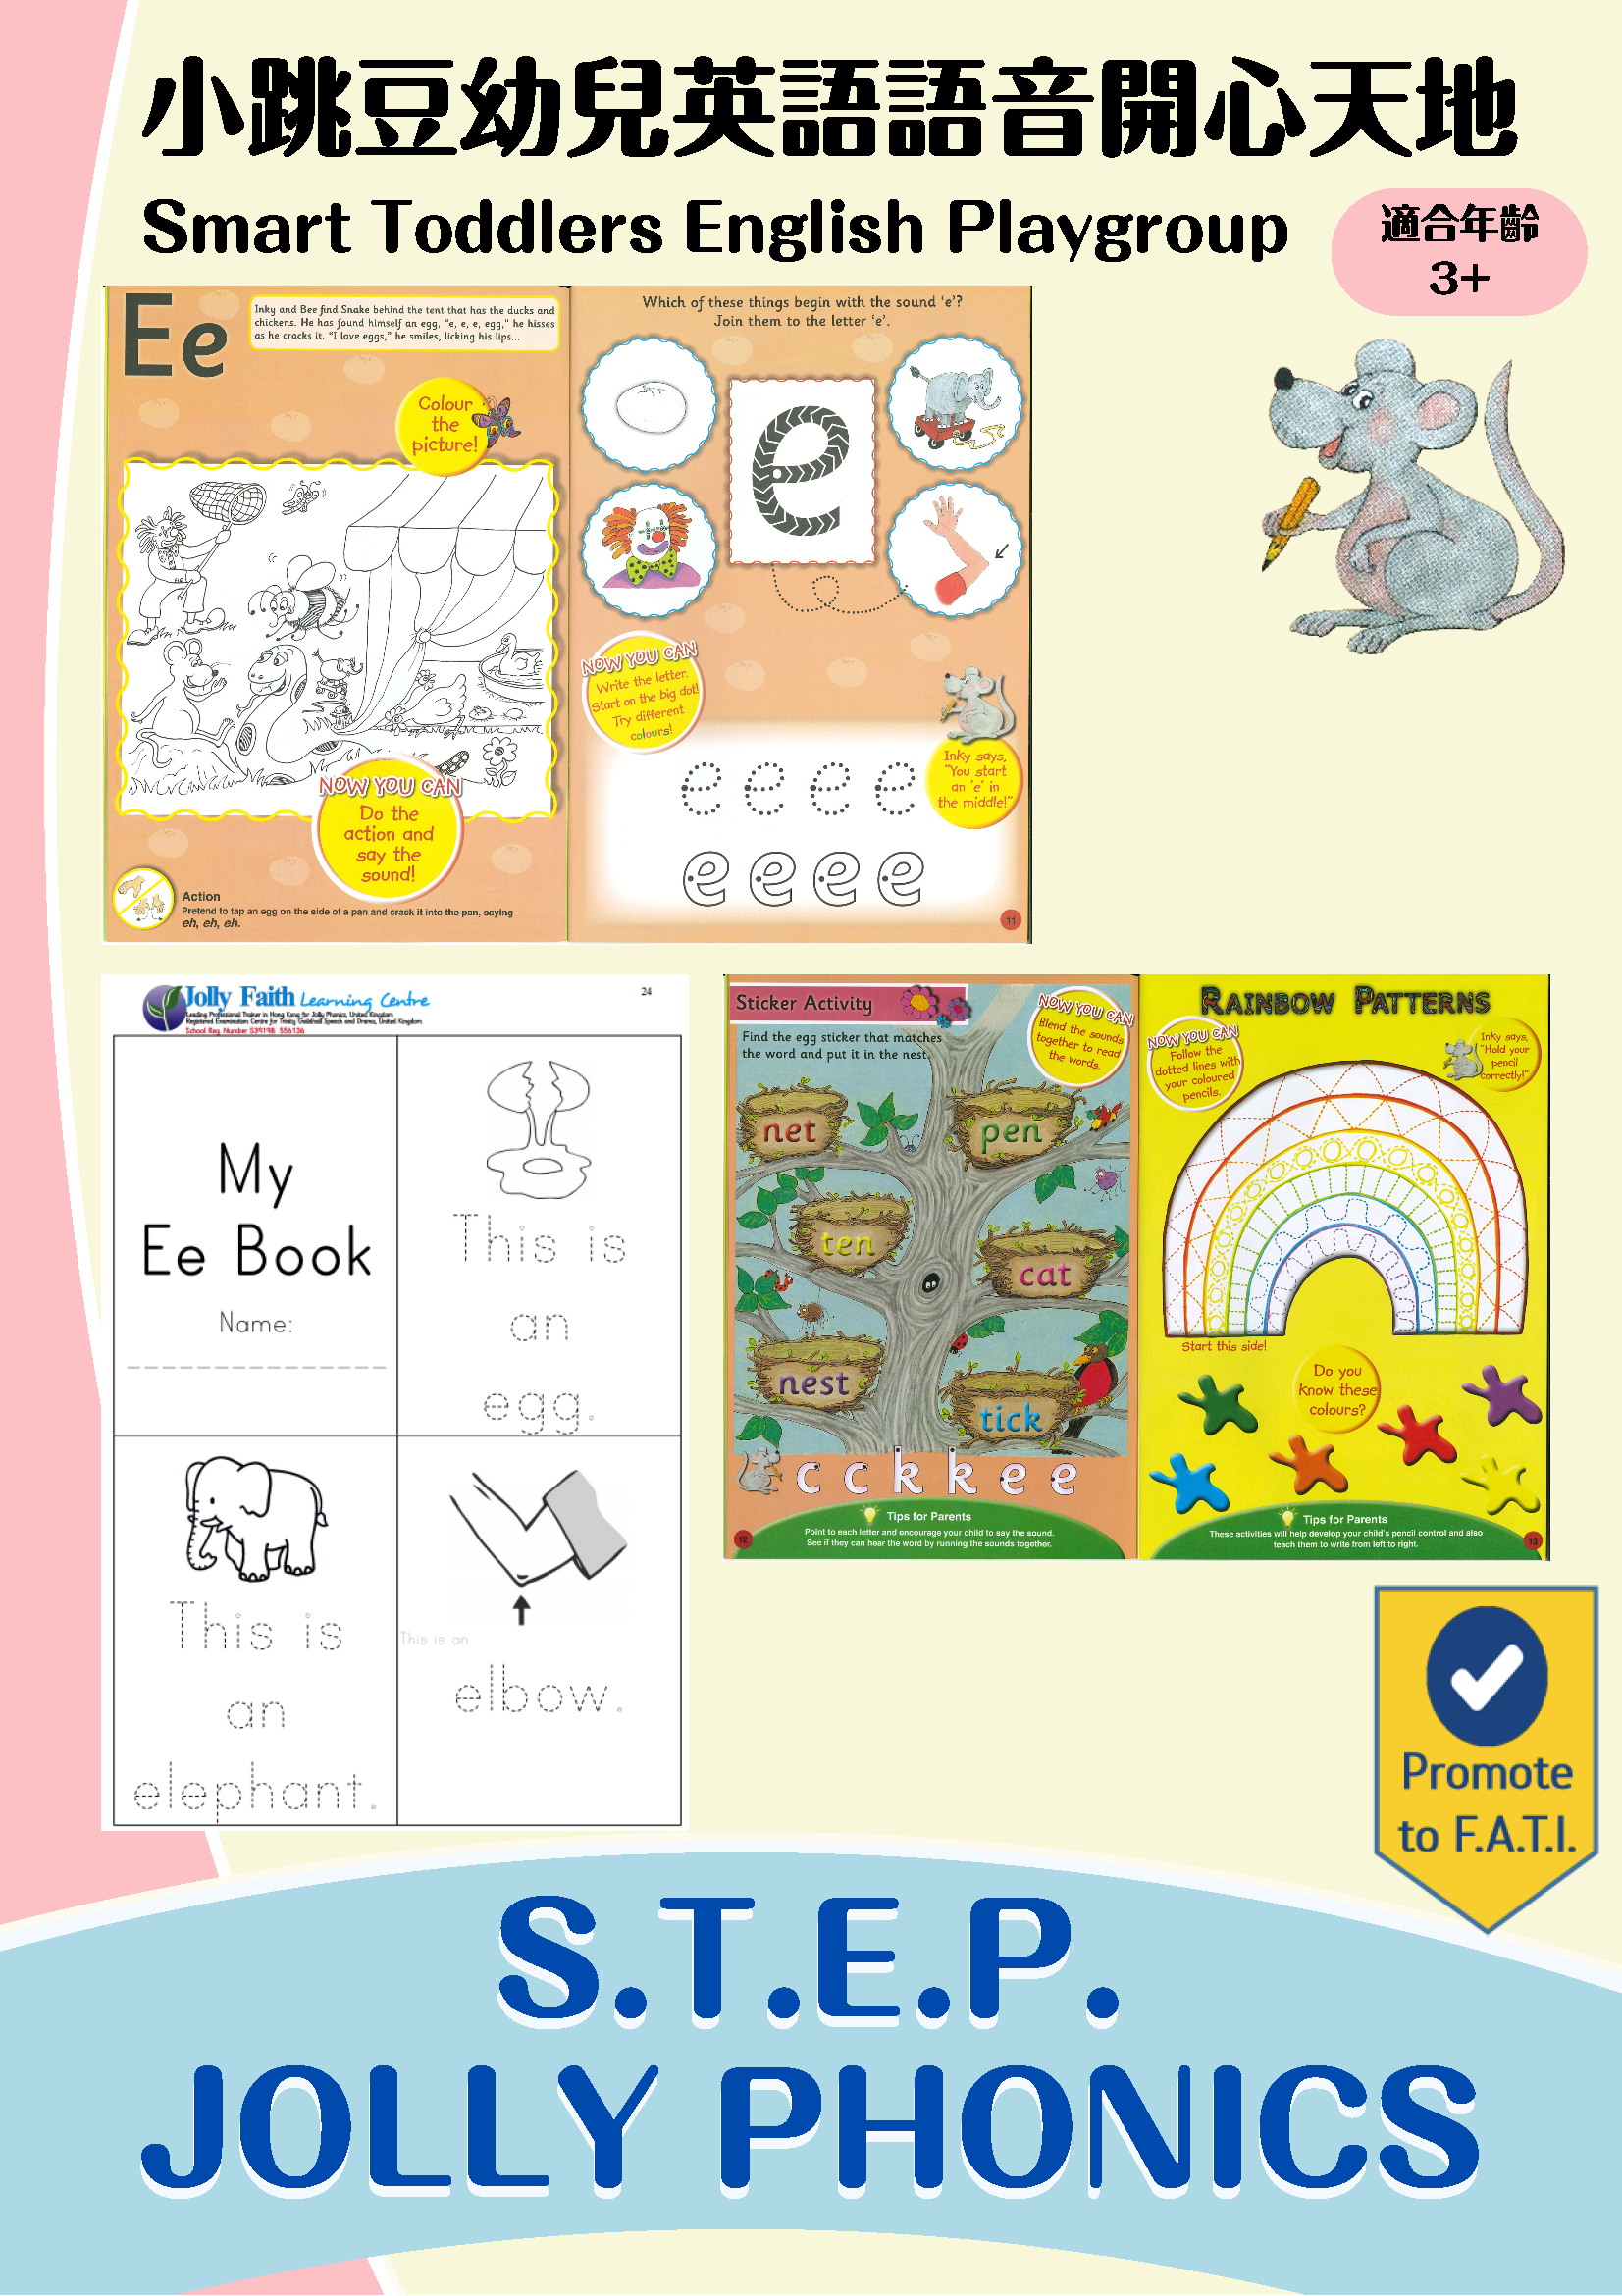 Smart Toddlers English Playgroup